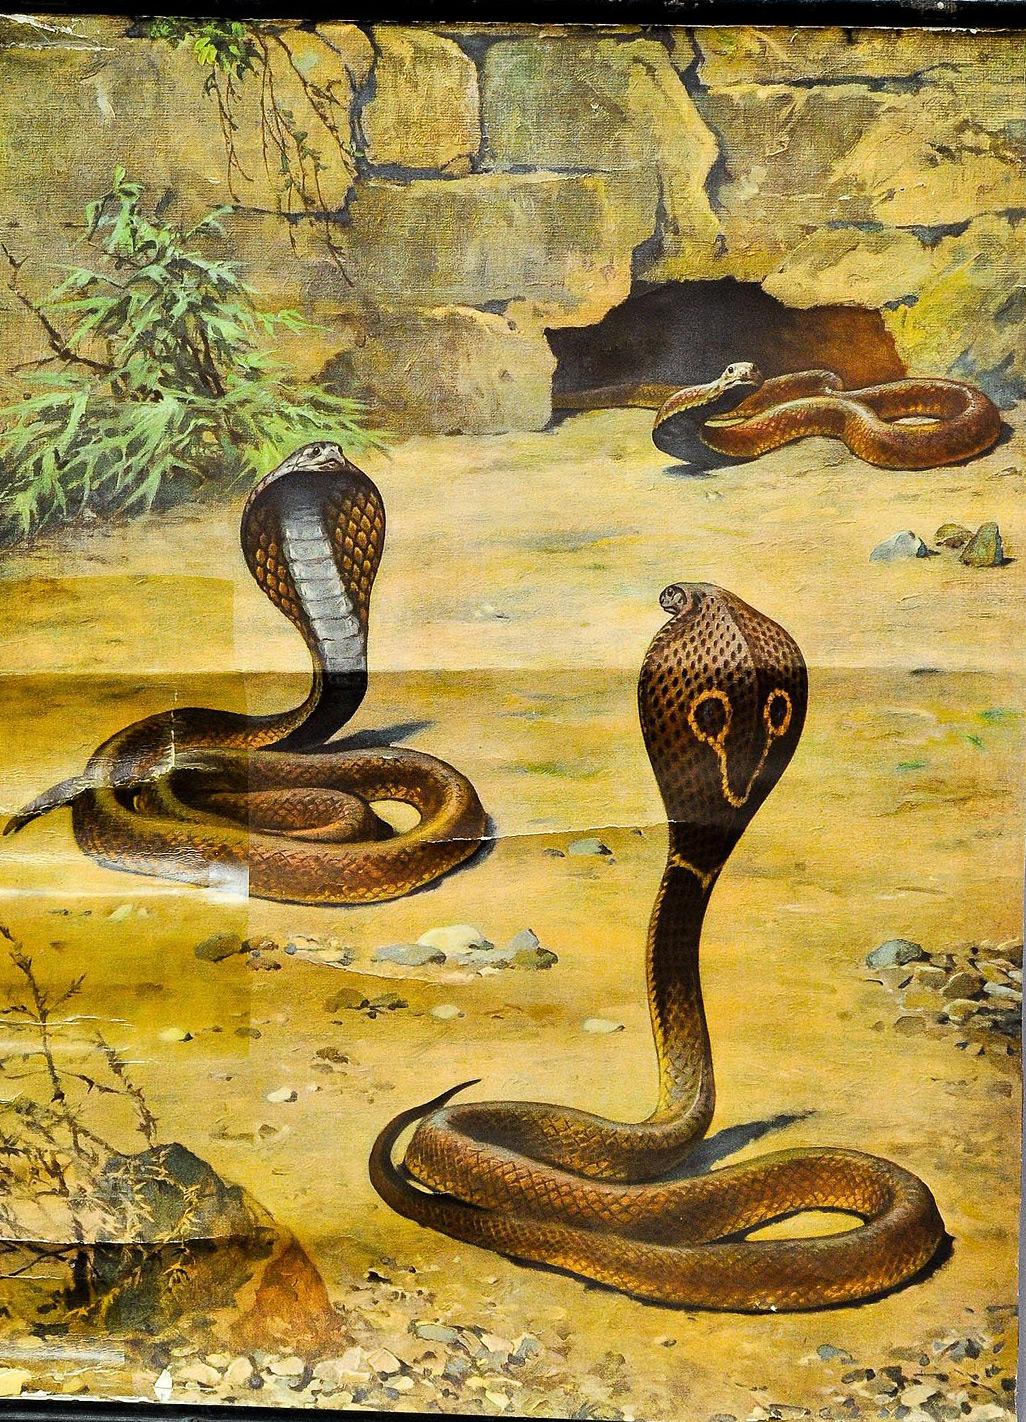 German Old Mural Countrycore Pull-Down Wallchart Scenery with Cobras Snake Poster Print For Sale